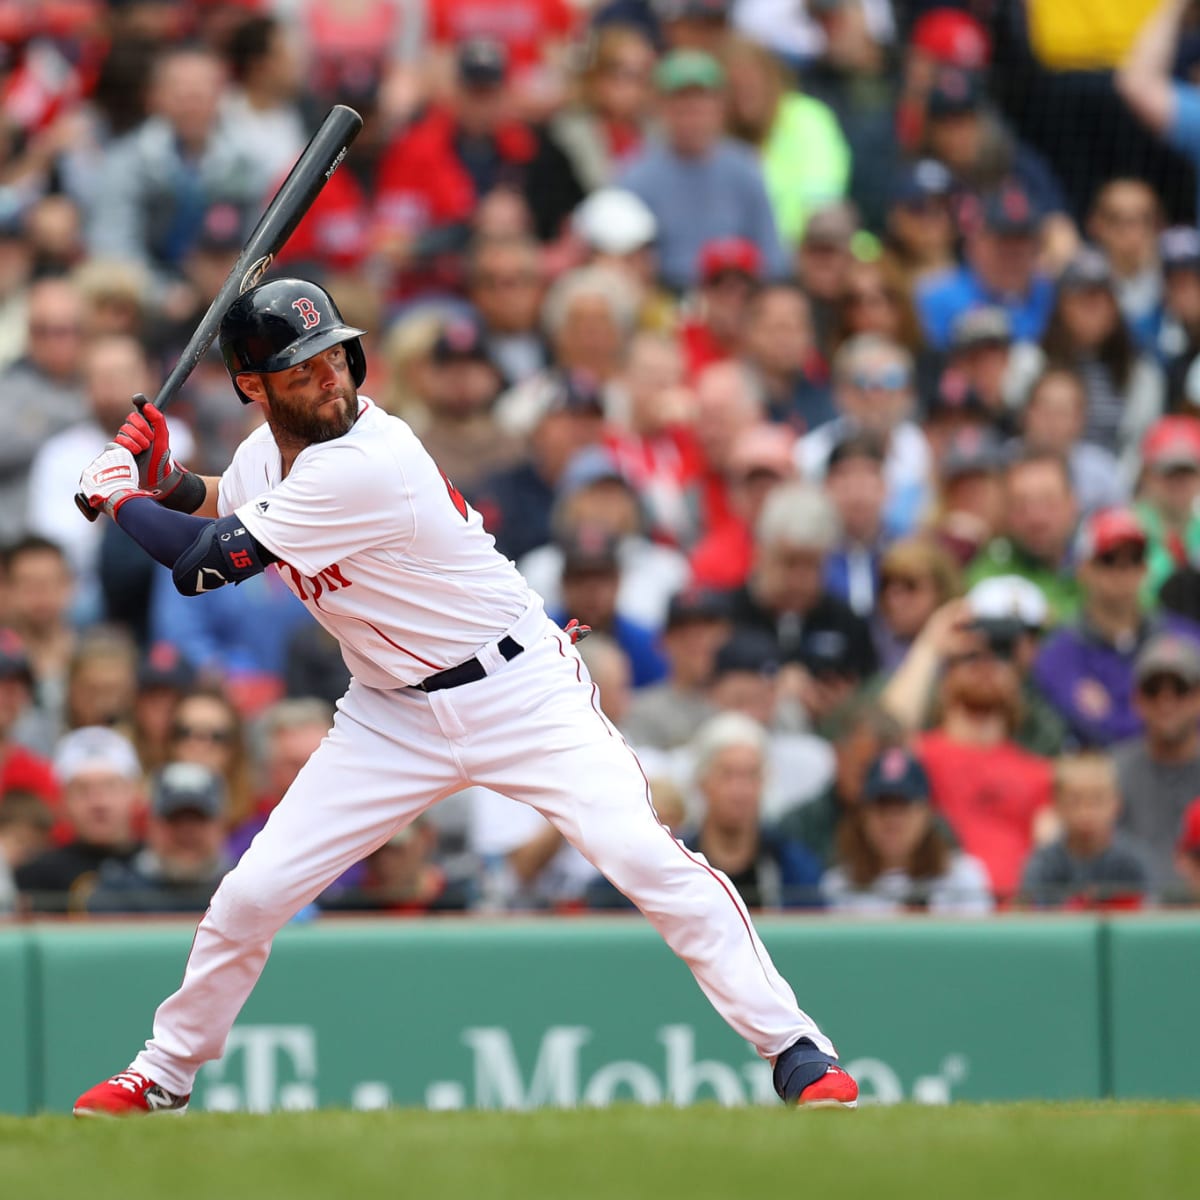 Dustin Pedroia, Red Sox second baseman and 2008 AL MVP, retires